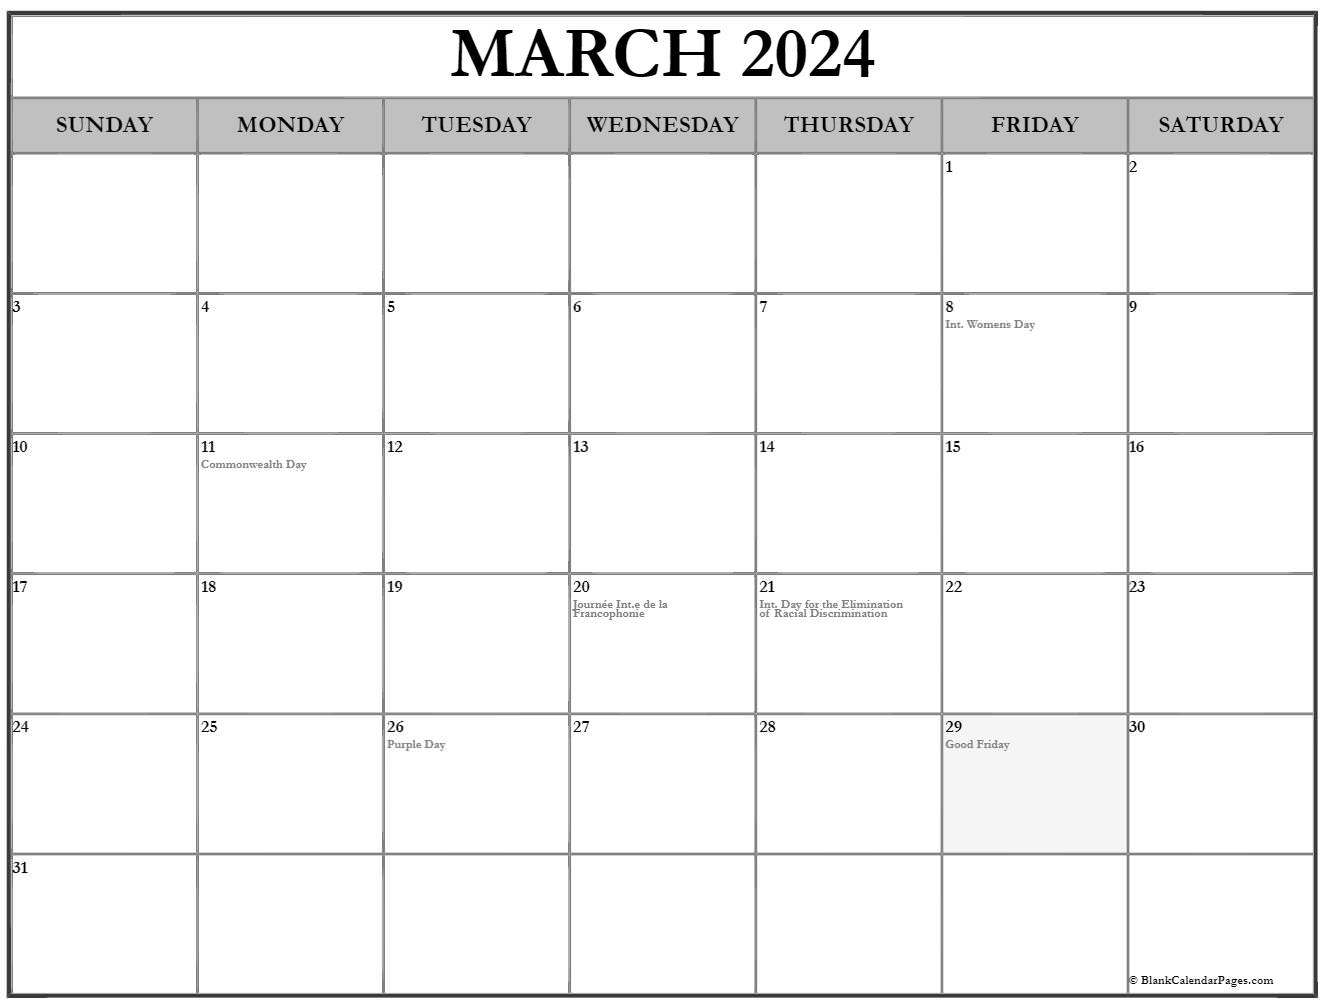 march-2024-uk-calendar-with-holidays-for-printing-image-format-www